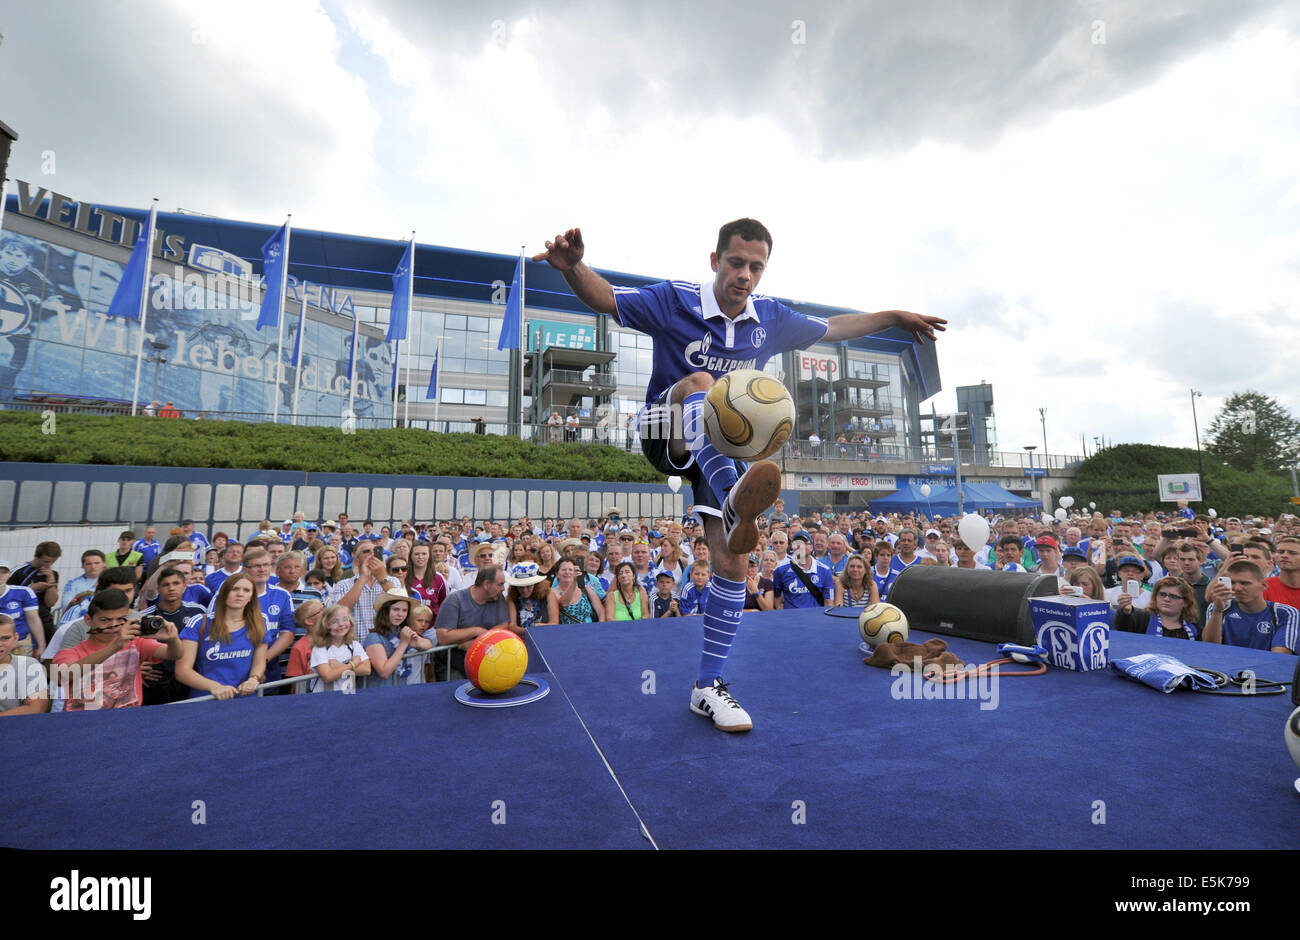 Gelsenkirchen, Germany. 03rd Aug, 2014. Schalke's Sinan OztUrk performs on stage during the supporting program of the Schalke Cup test matches on the Schalke Day in front of the Veltins-Arena in Gelsenkirchen, Germany, 03 August 2014. Photo: Matthias Balk/dpa/Alamy Live News Stock Photo